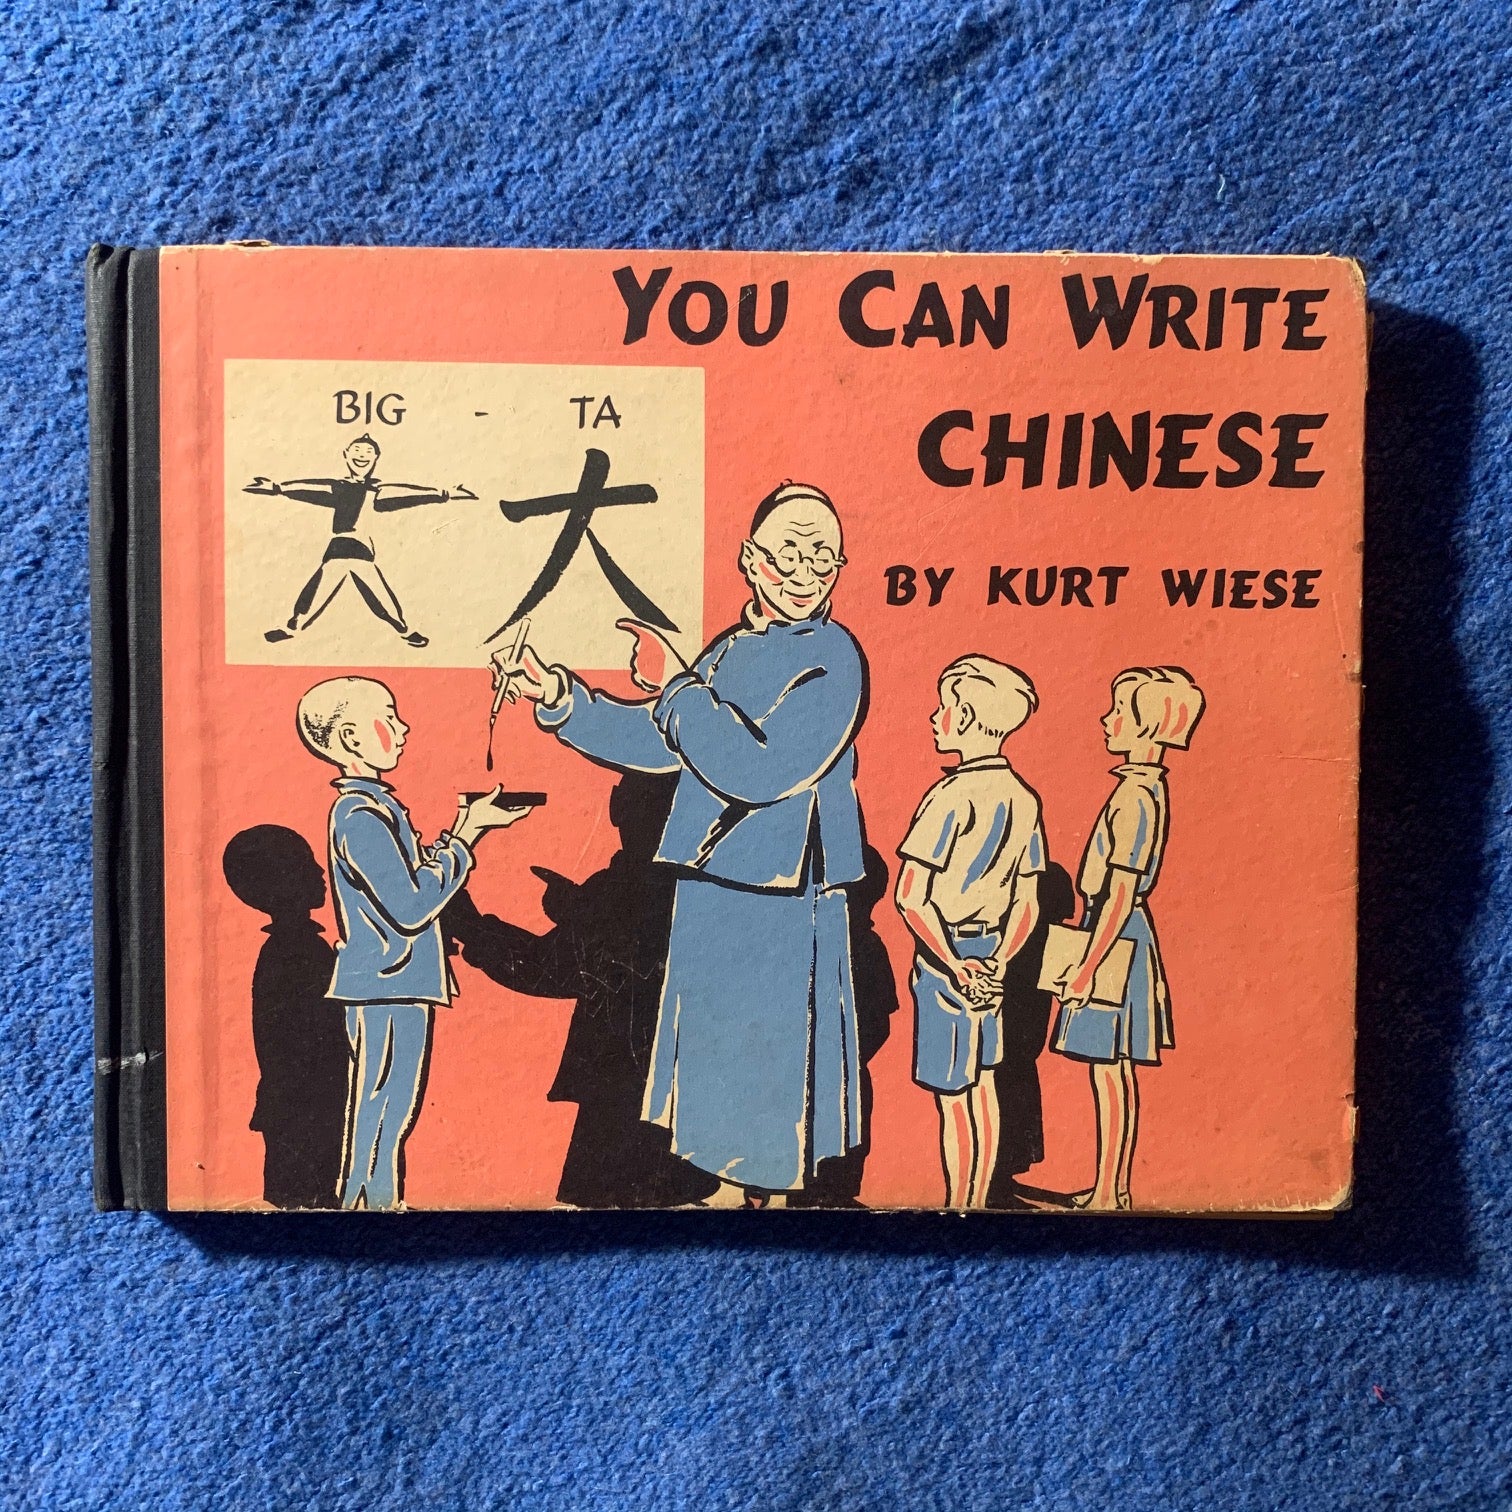 You Can Write Chinese by Kurt Wiese